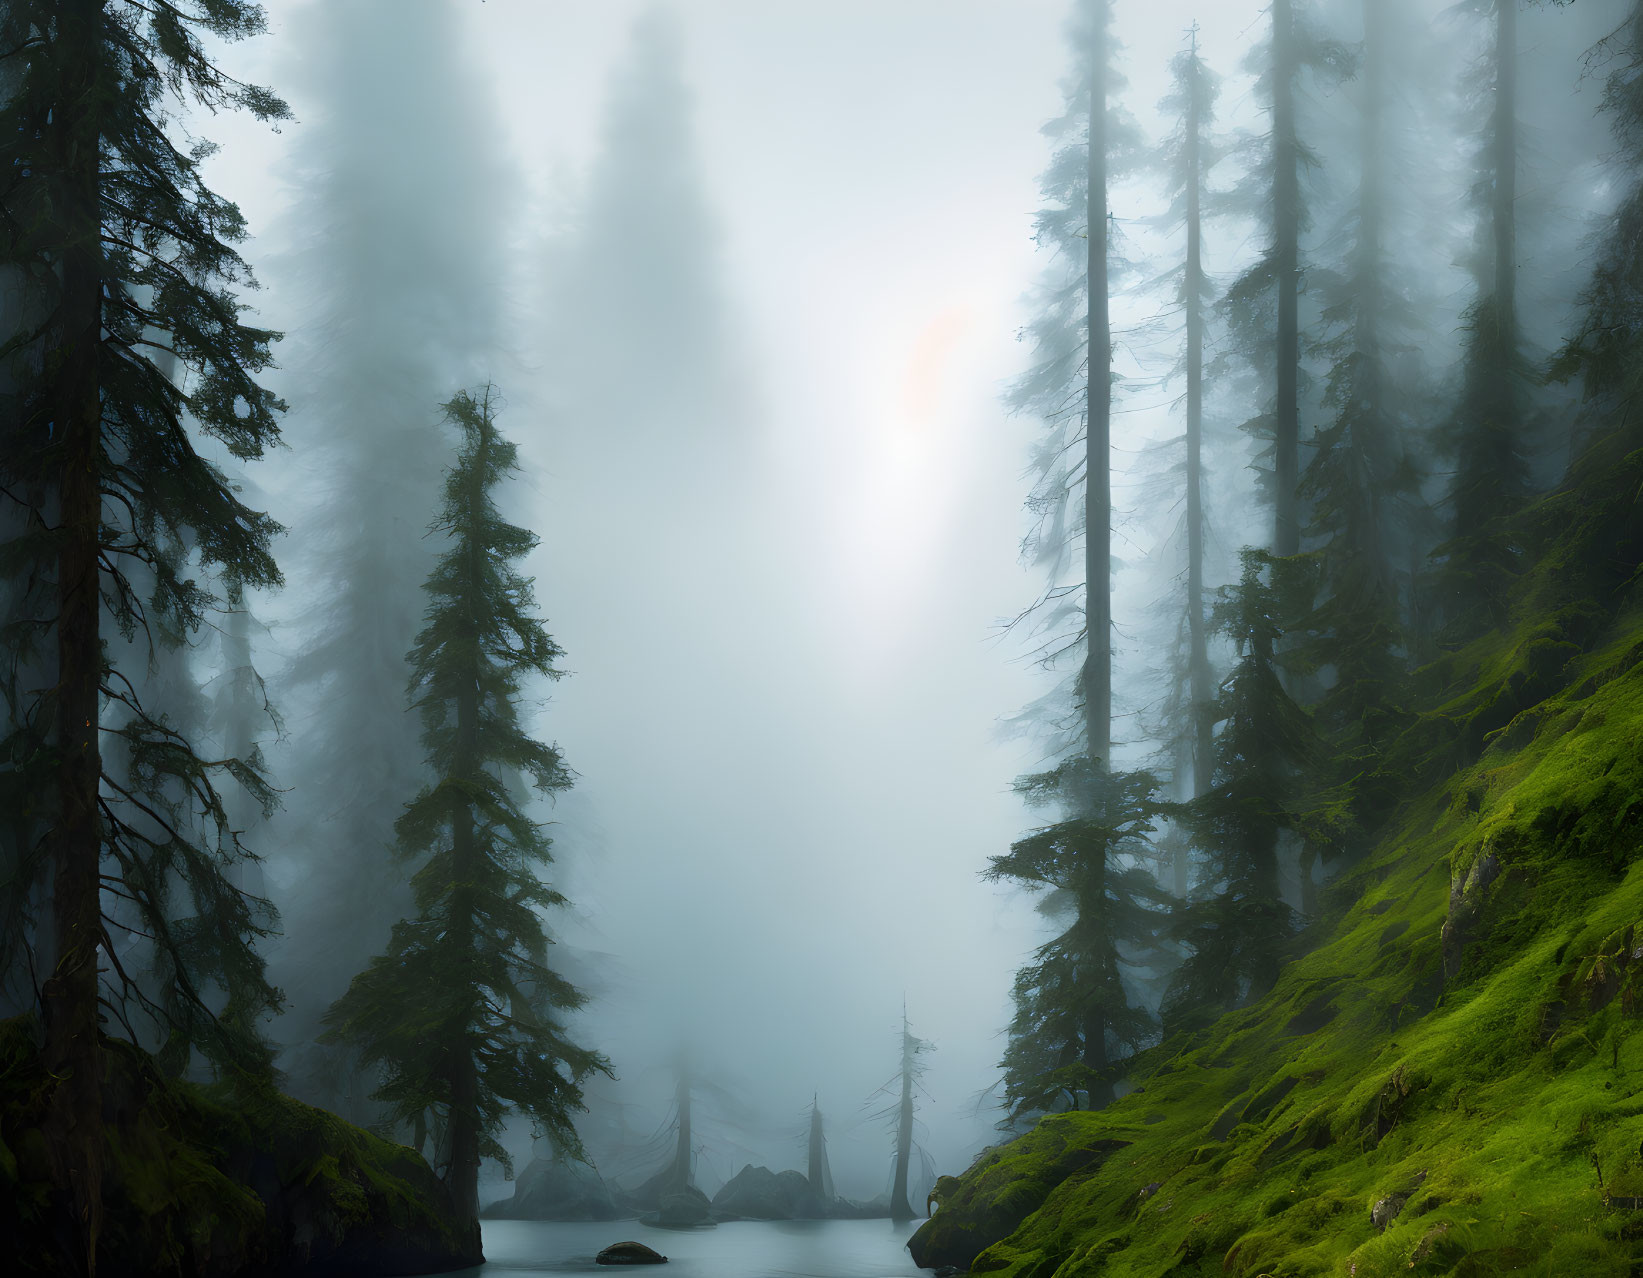 Mystical foggy forest with sunlight filtering through tall trees